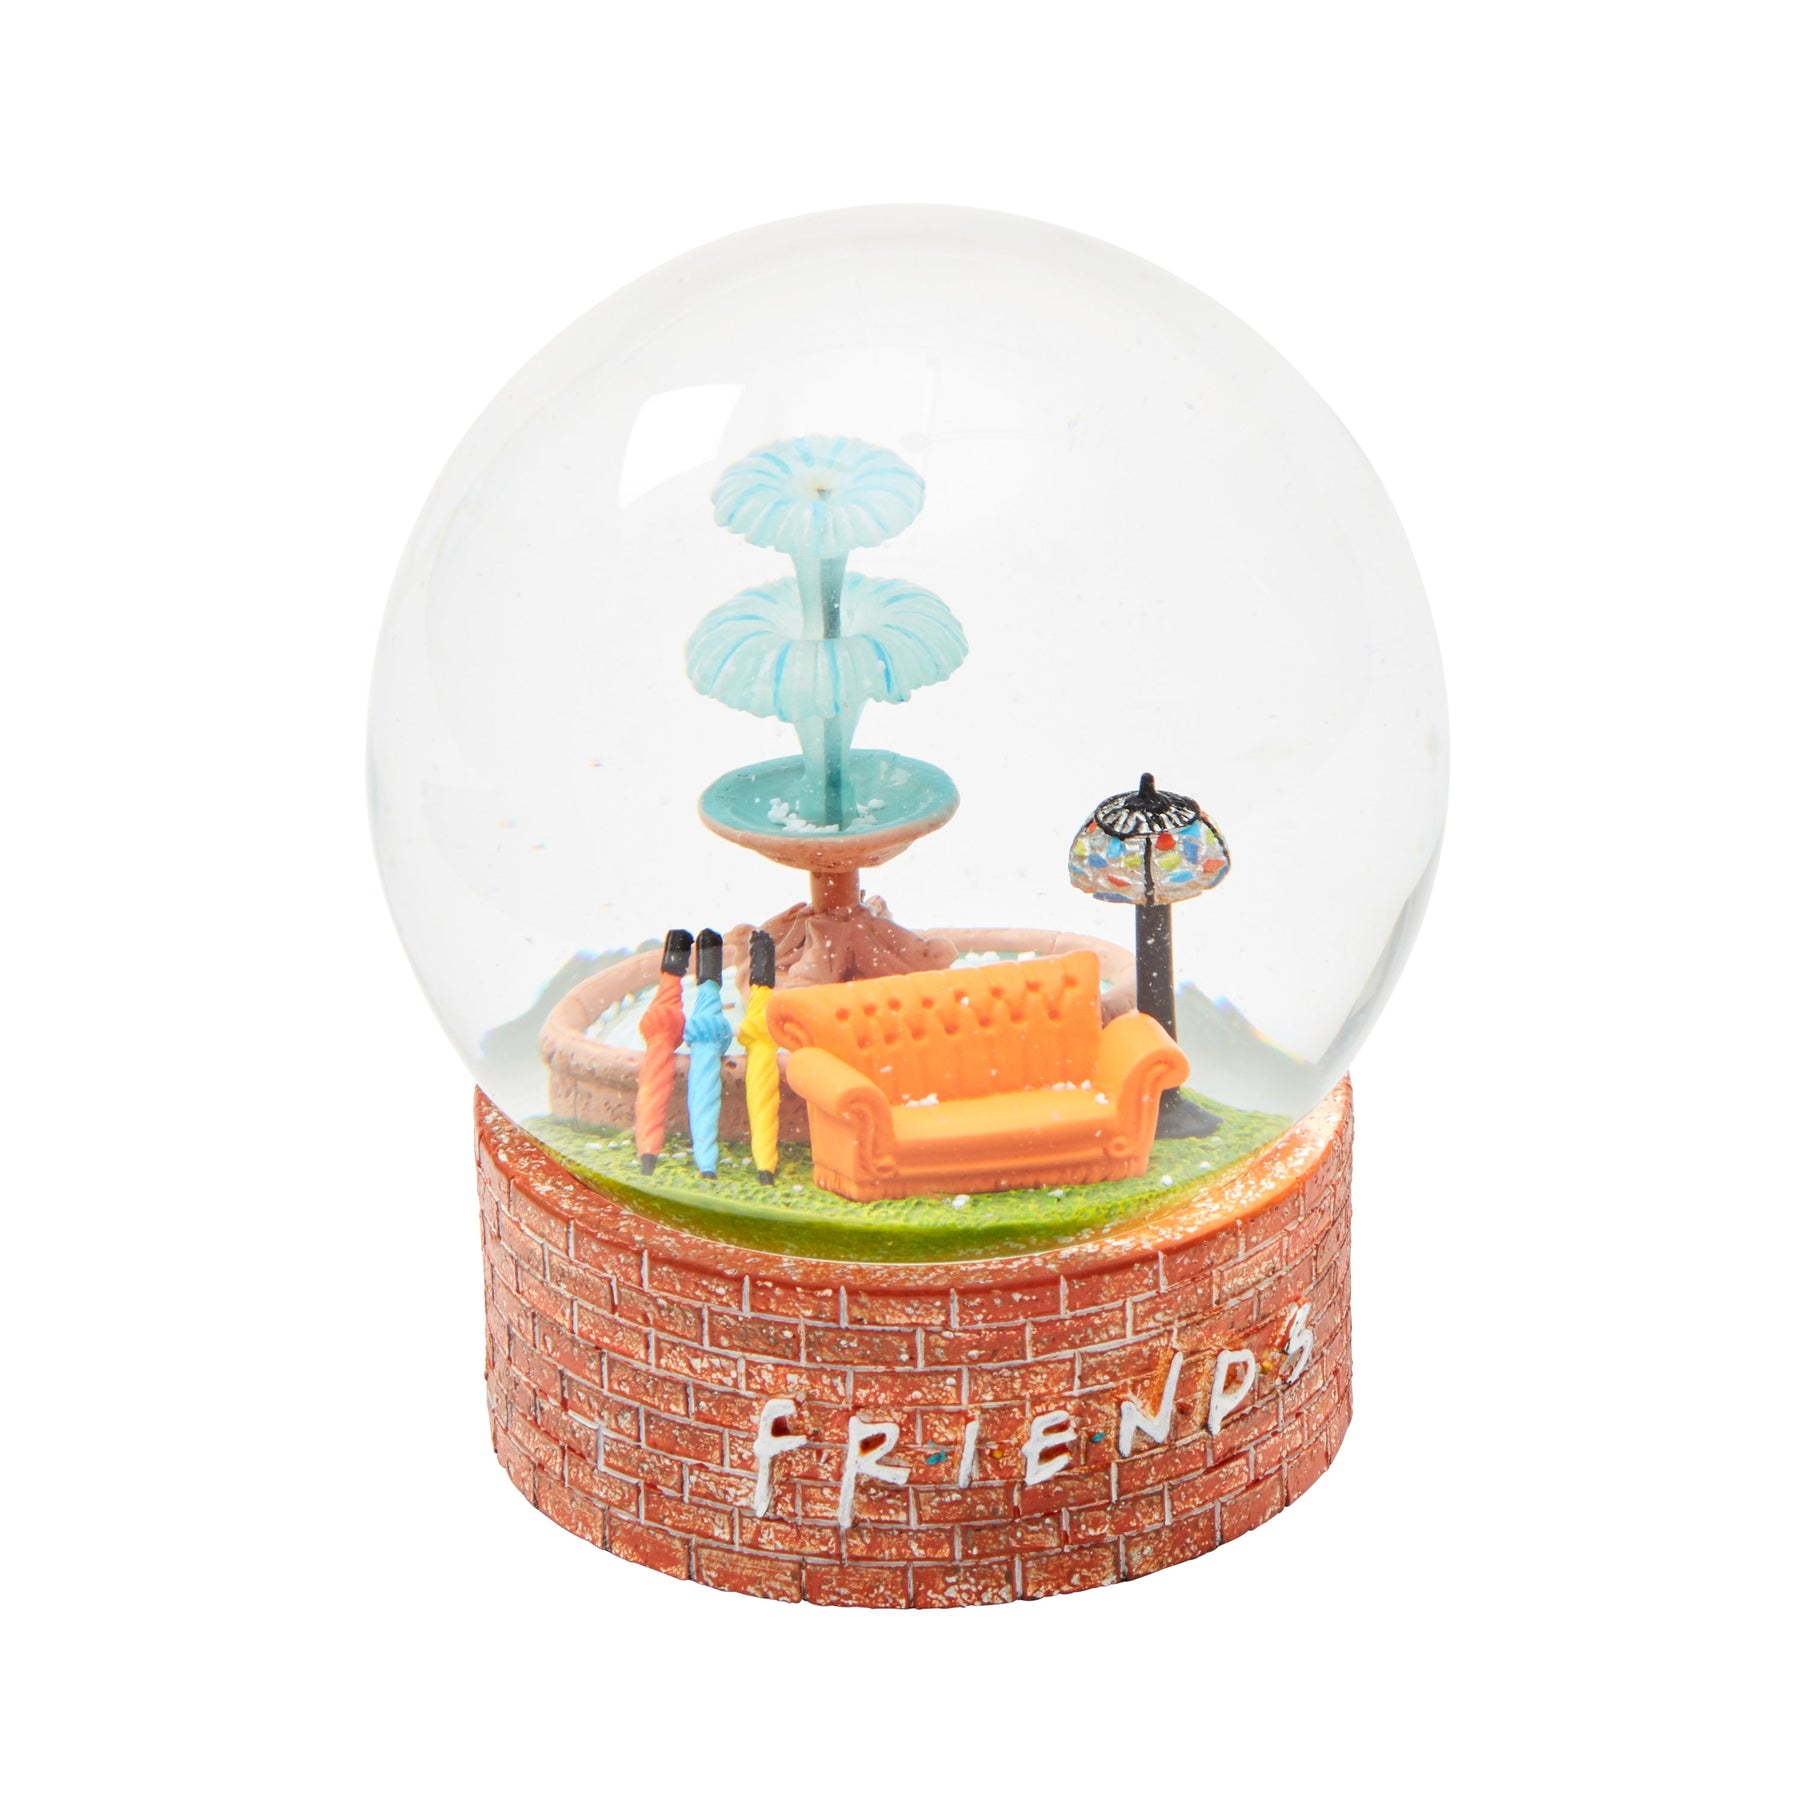 The Friends Experience Official Store Hugsy Enamel Pin – Friends The  Experience